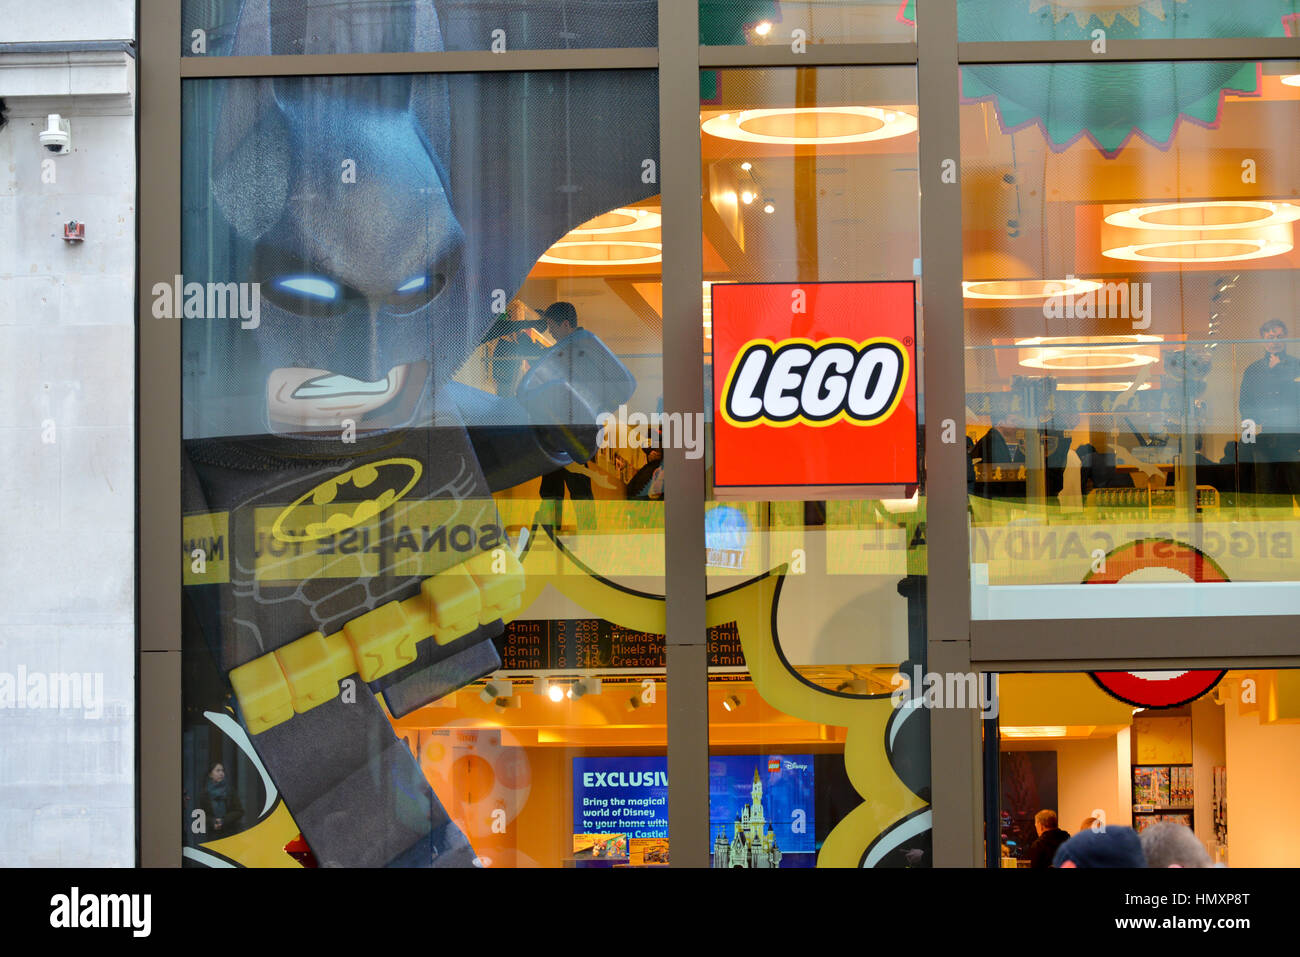 Leicester Square, London, UK. 7th Feb, 2017. The LEGO Batman Movie is  promoted at the LEGO store in London's Leicester Square. Credit: Matthew  Chattle/Alamy Live News Stock Photo - Alamy